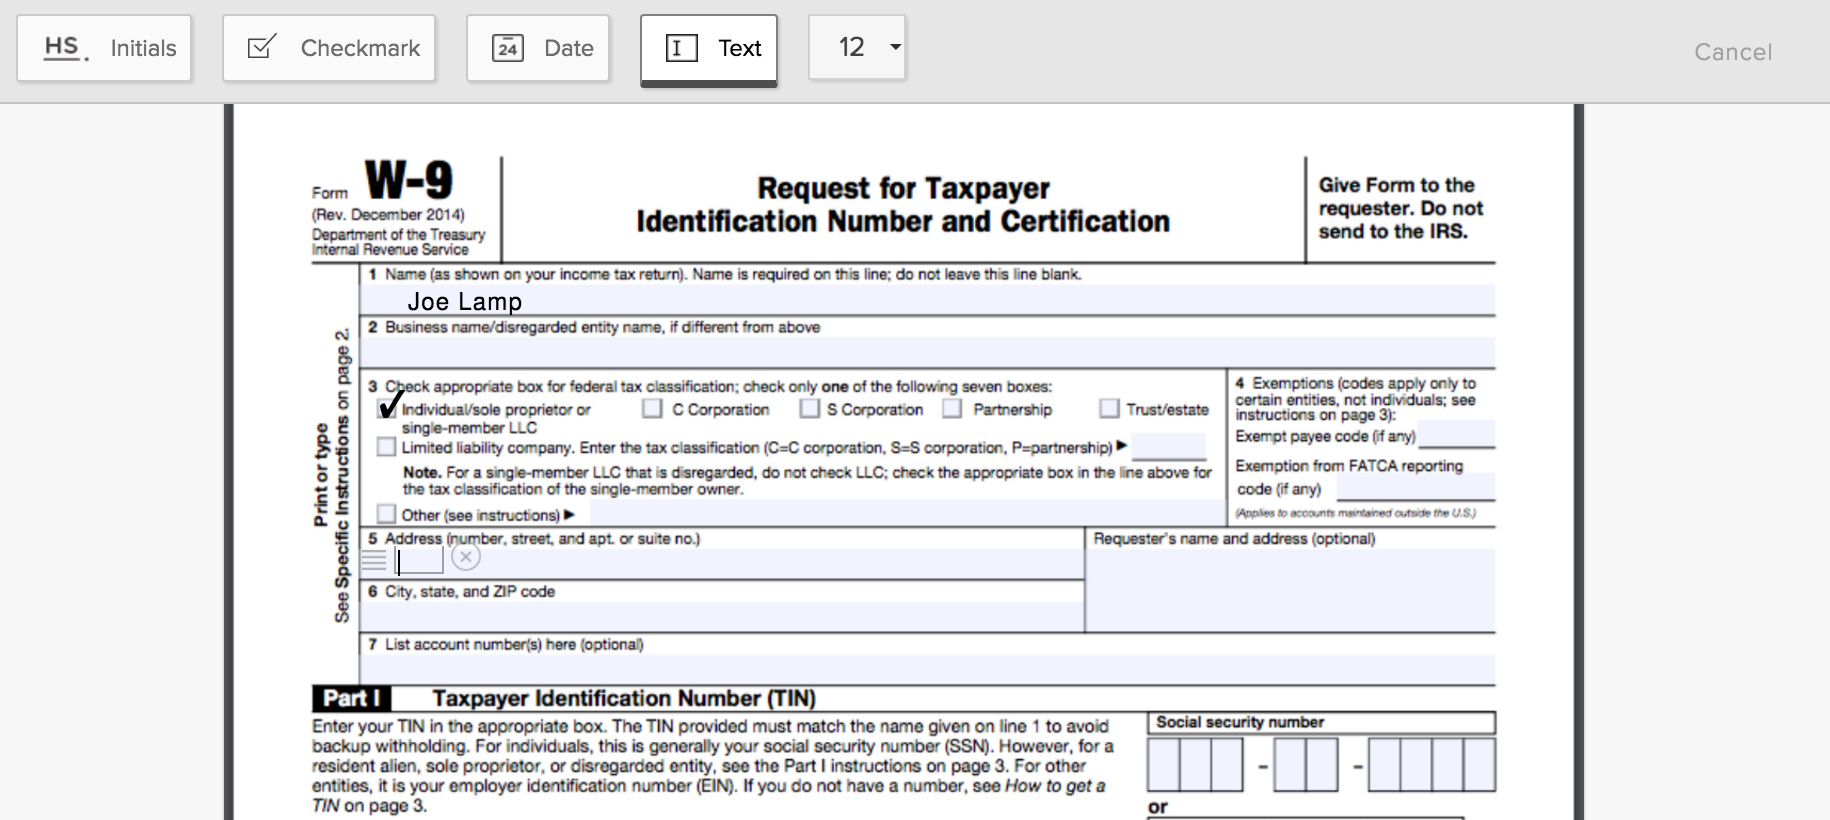 How To Fill Out A W-9 Form Online - Hellosign Blog